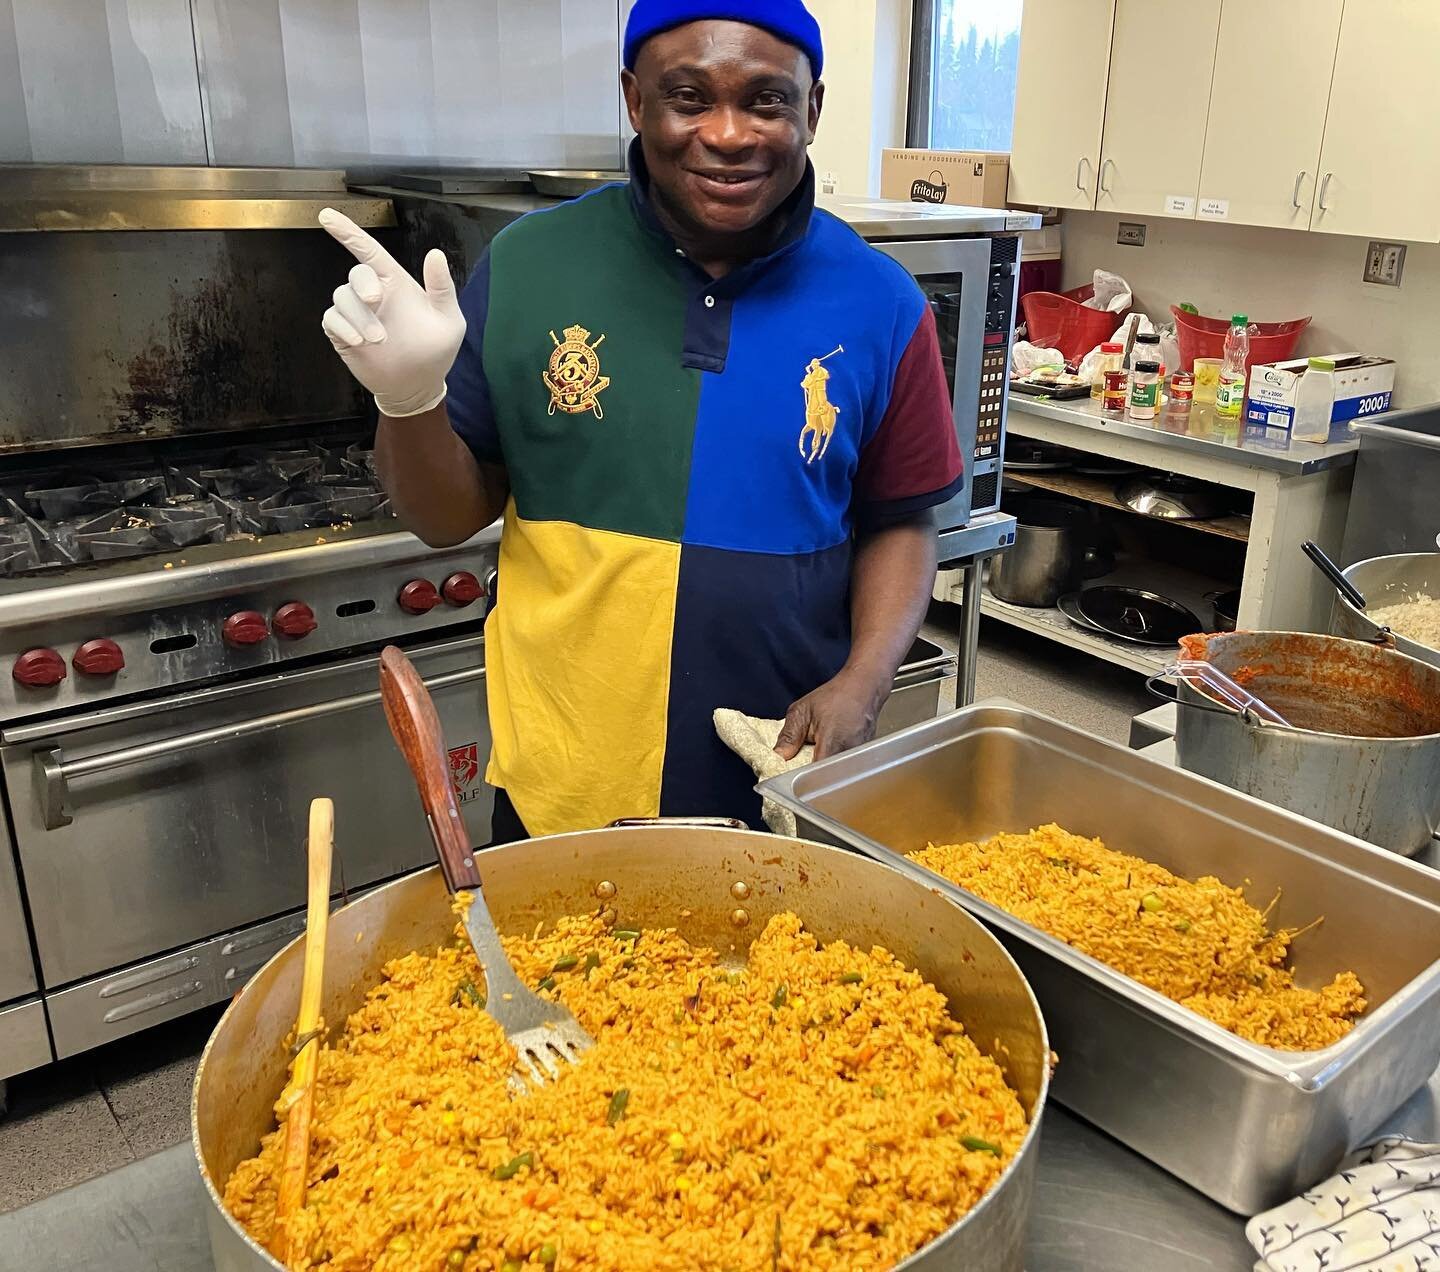 Chef Jonathan from Nigeria with his famous Jollaf rice for 150 people catering last week!! 

If you haven't put in your catering request for this year, do it now!! 

➡️Catering link is in our bio

#chefjonathanfwk #feastworldkitchen #spokanewashingto